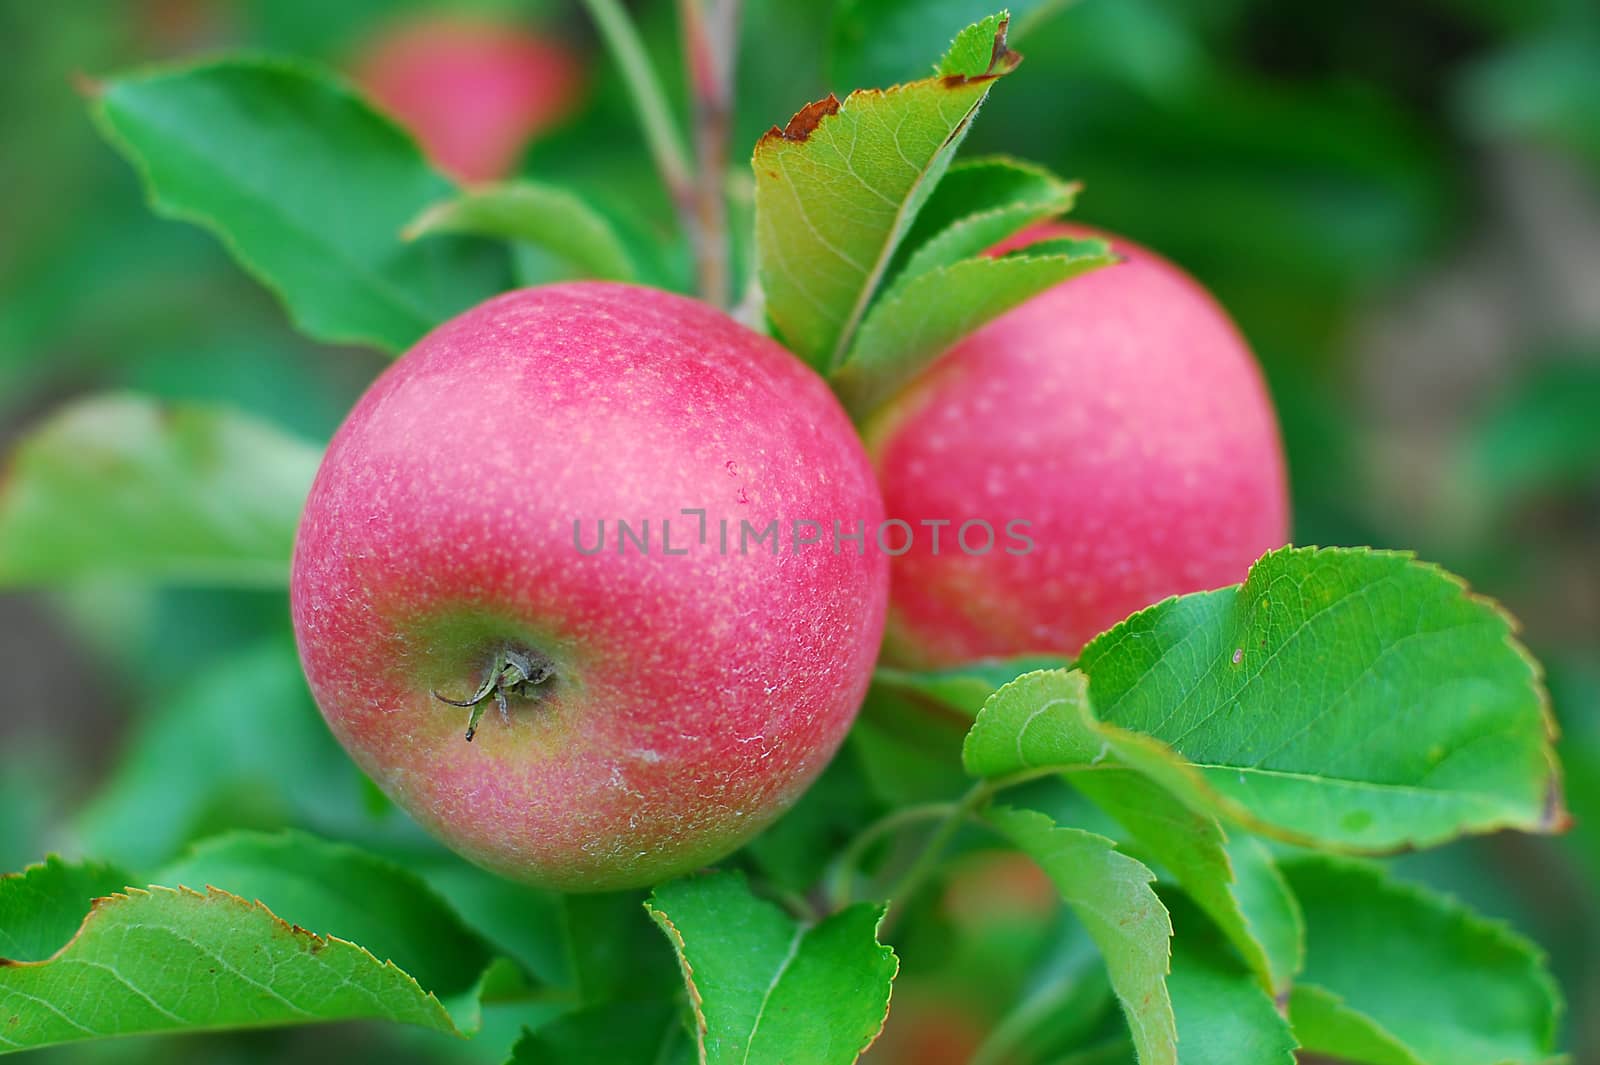 Red delicious apple by nikonite